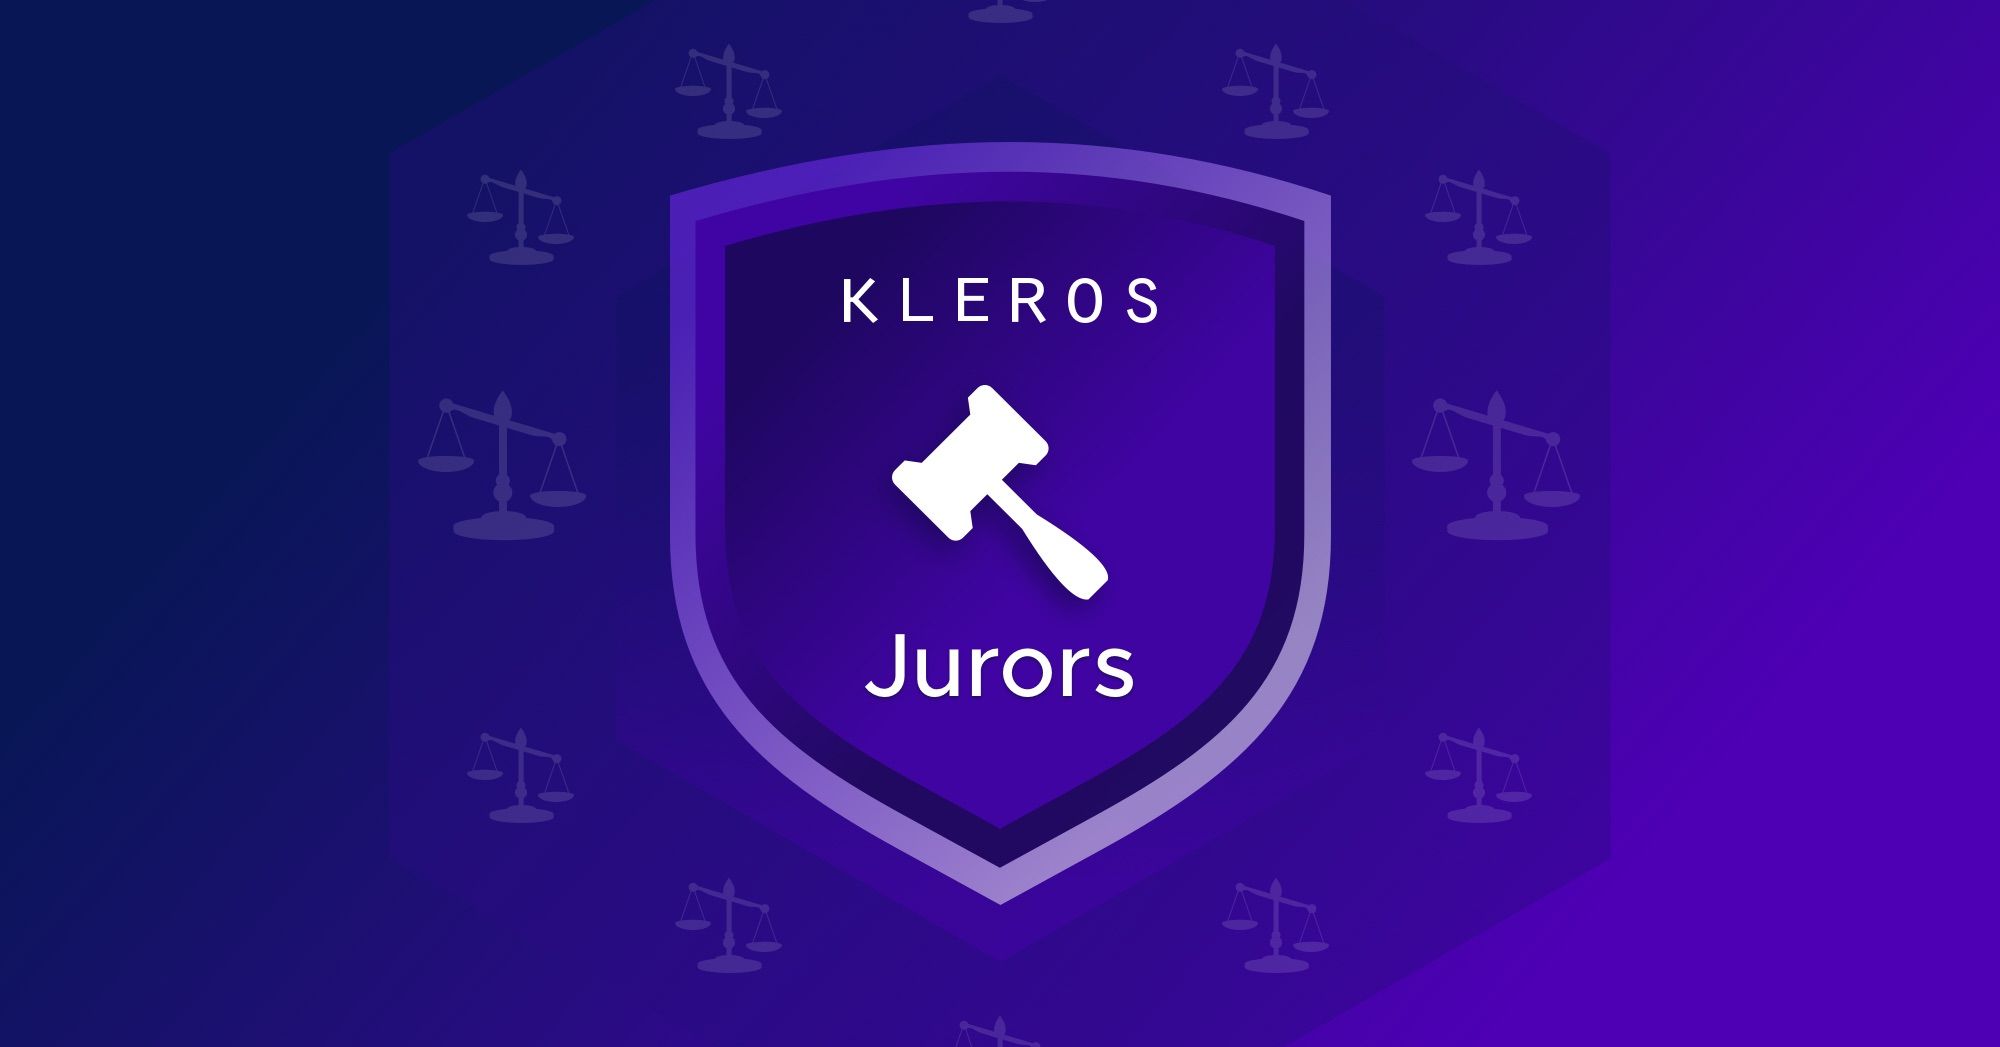 3 Things to Know About Becoming a Kleros Juror